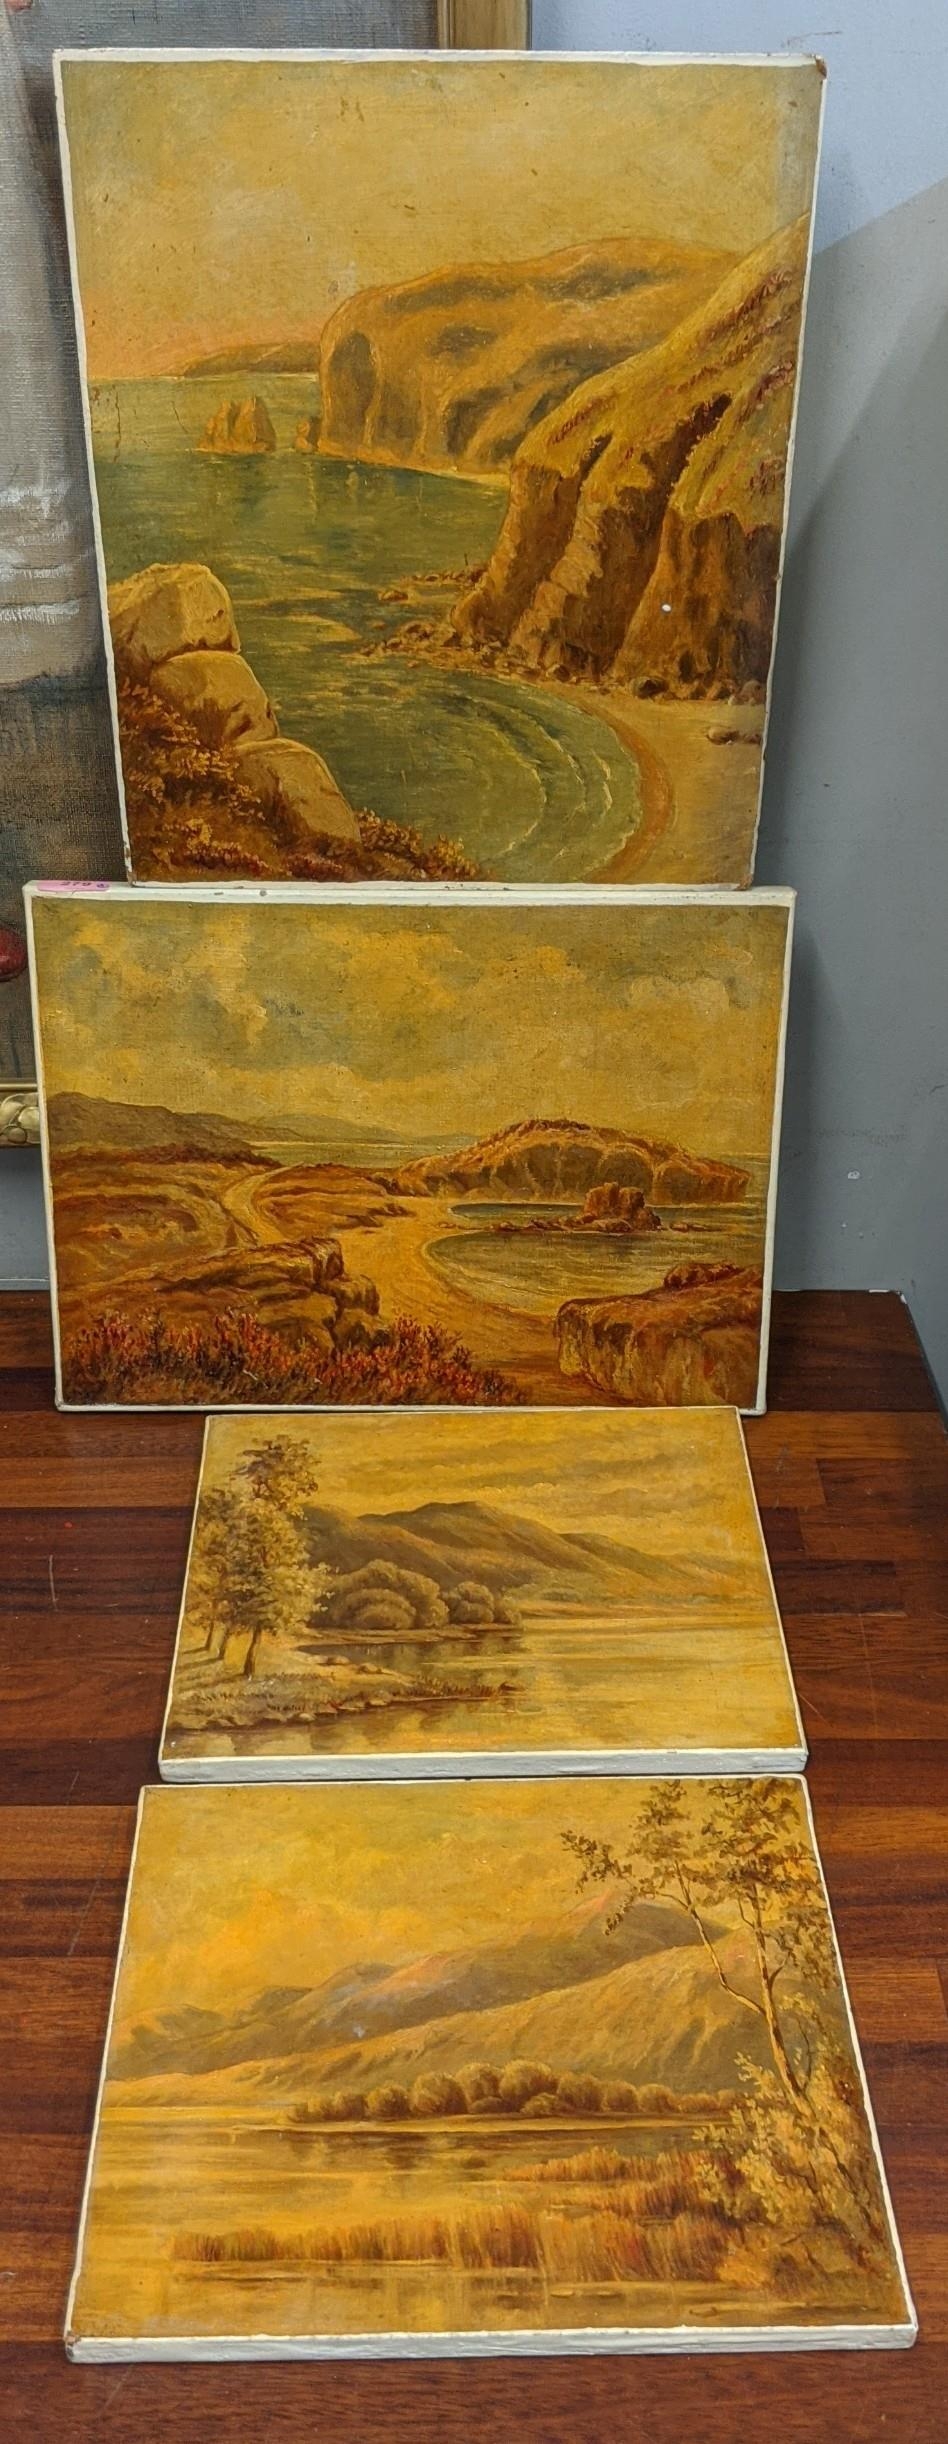 Four oil paintings, three on canvas and one on board, depicting two seascapes and two lake scenes